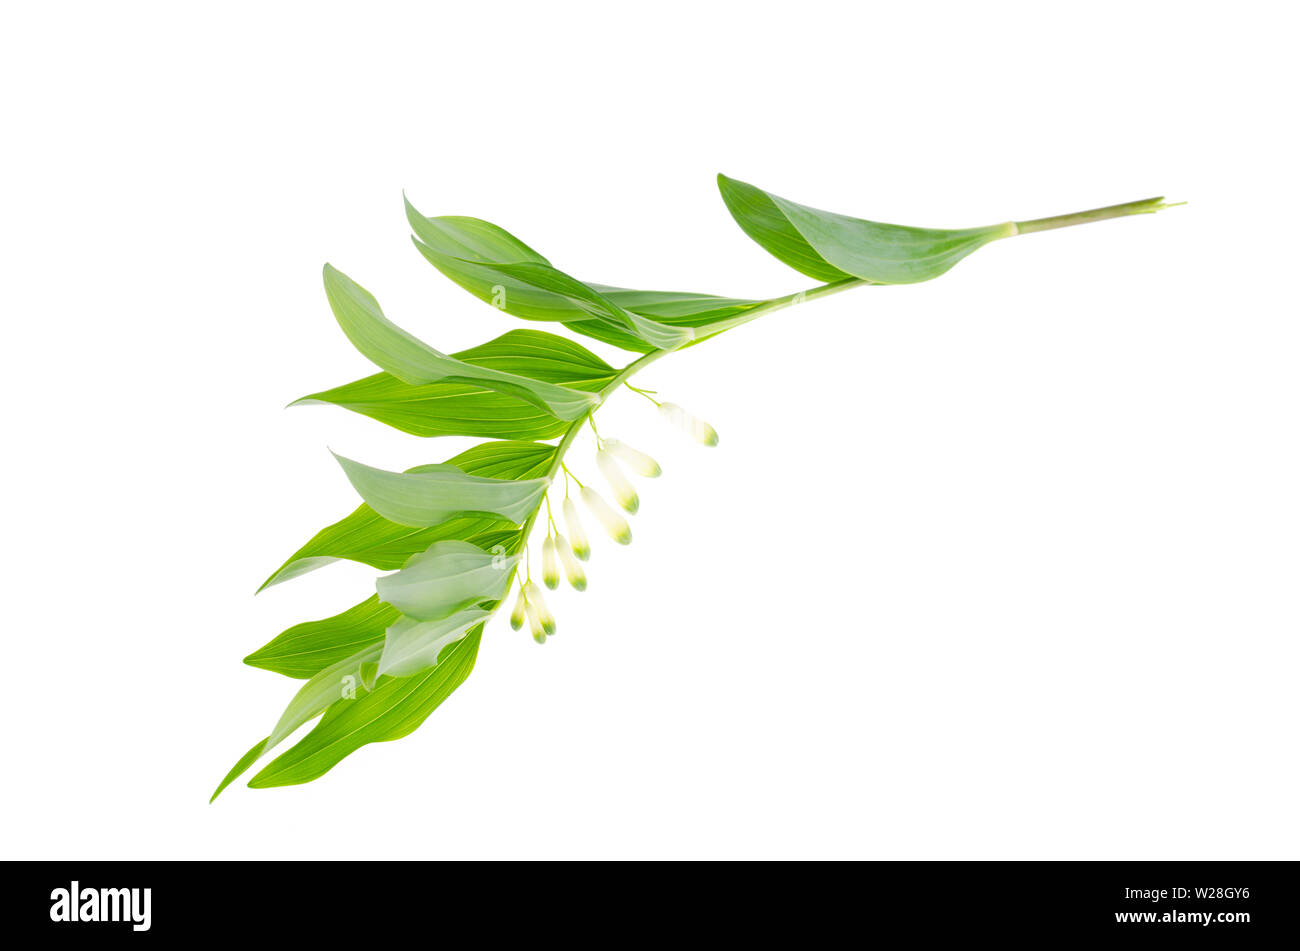 Polygonatum officinalis branch with white flowers and green leaves.  Stock Photo